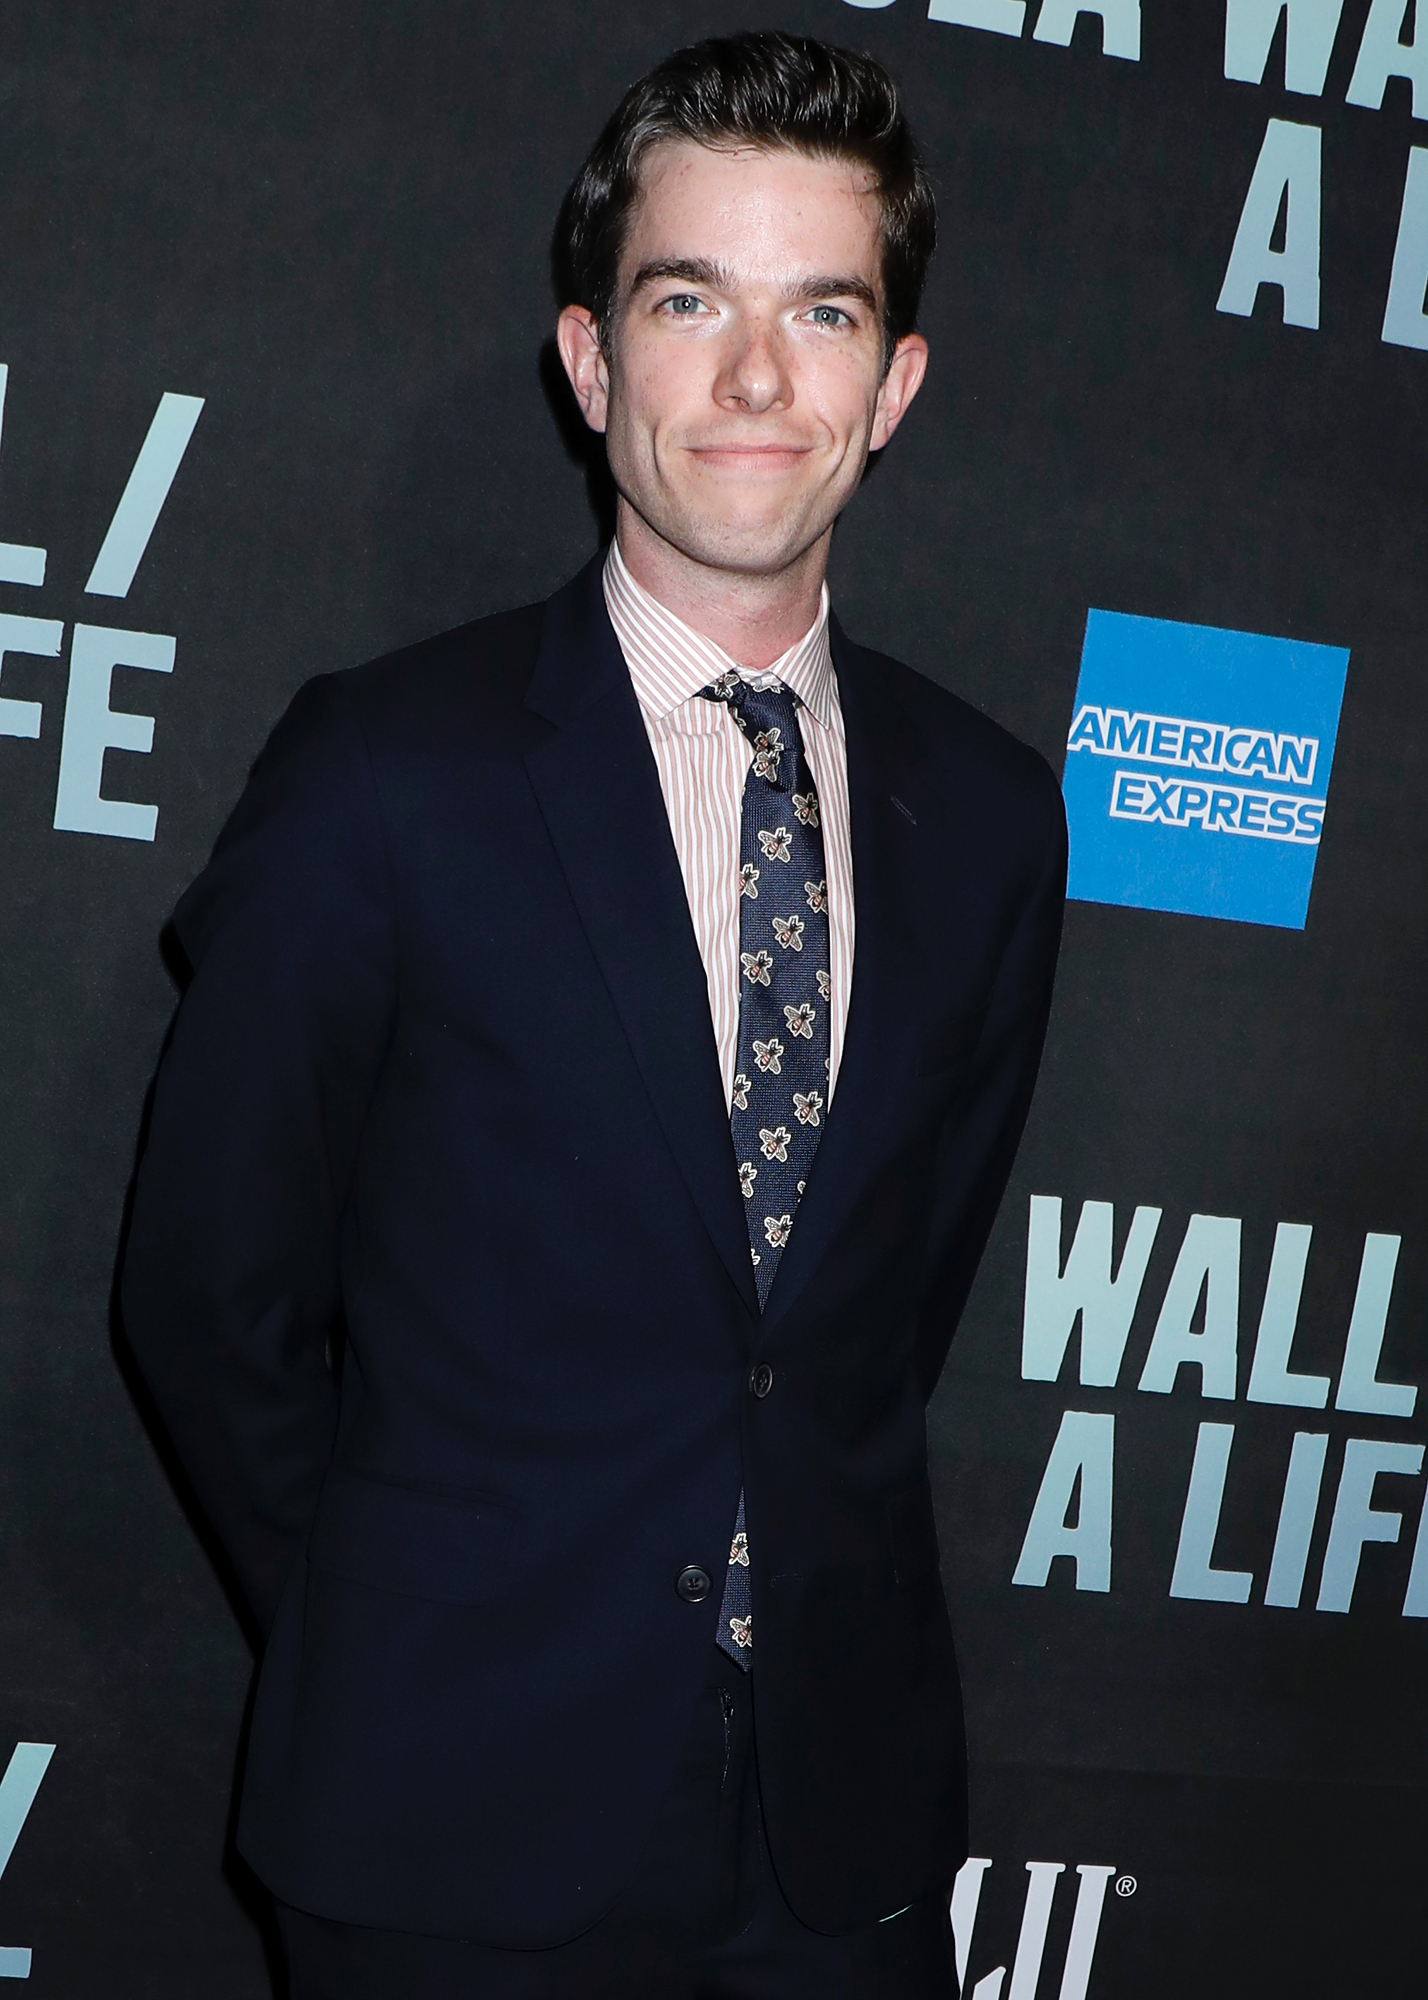 John Mulaney and Anna Marie Tendler’s Divorce: Everything We Know